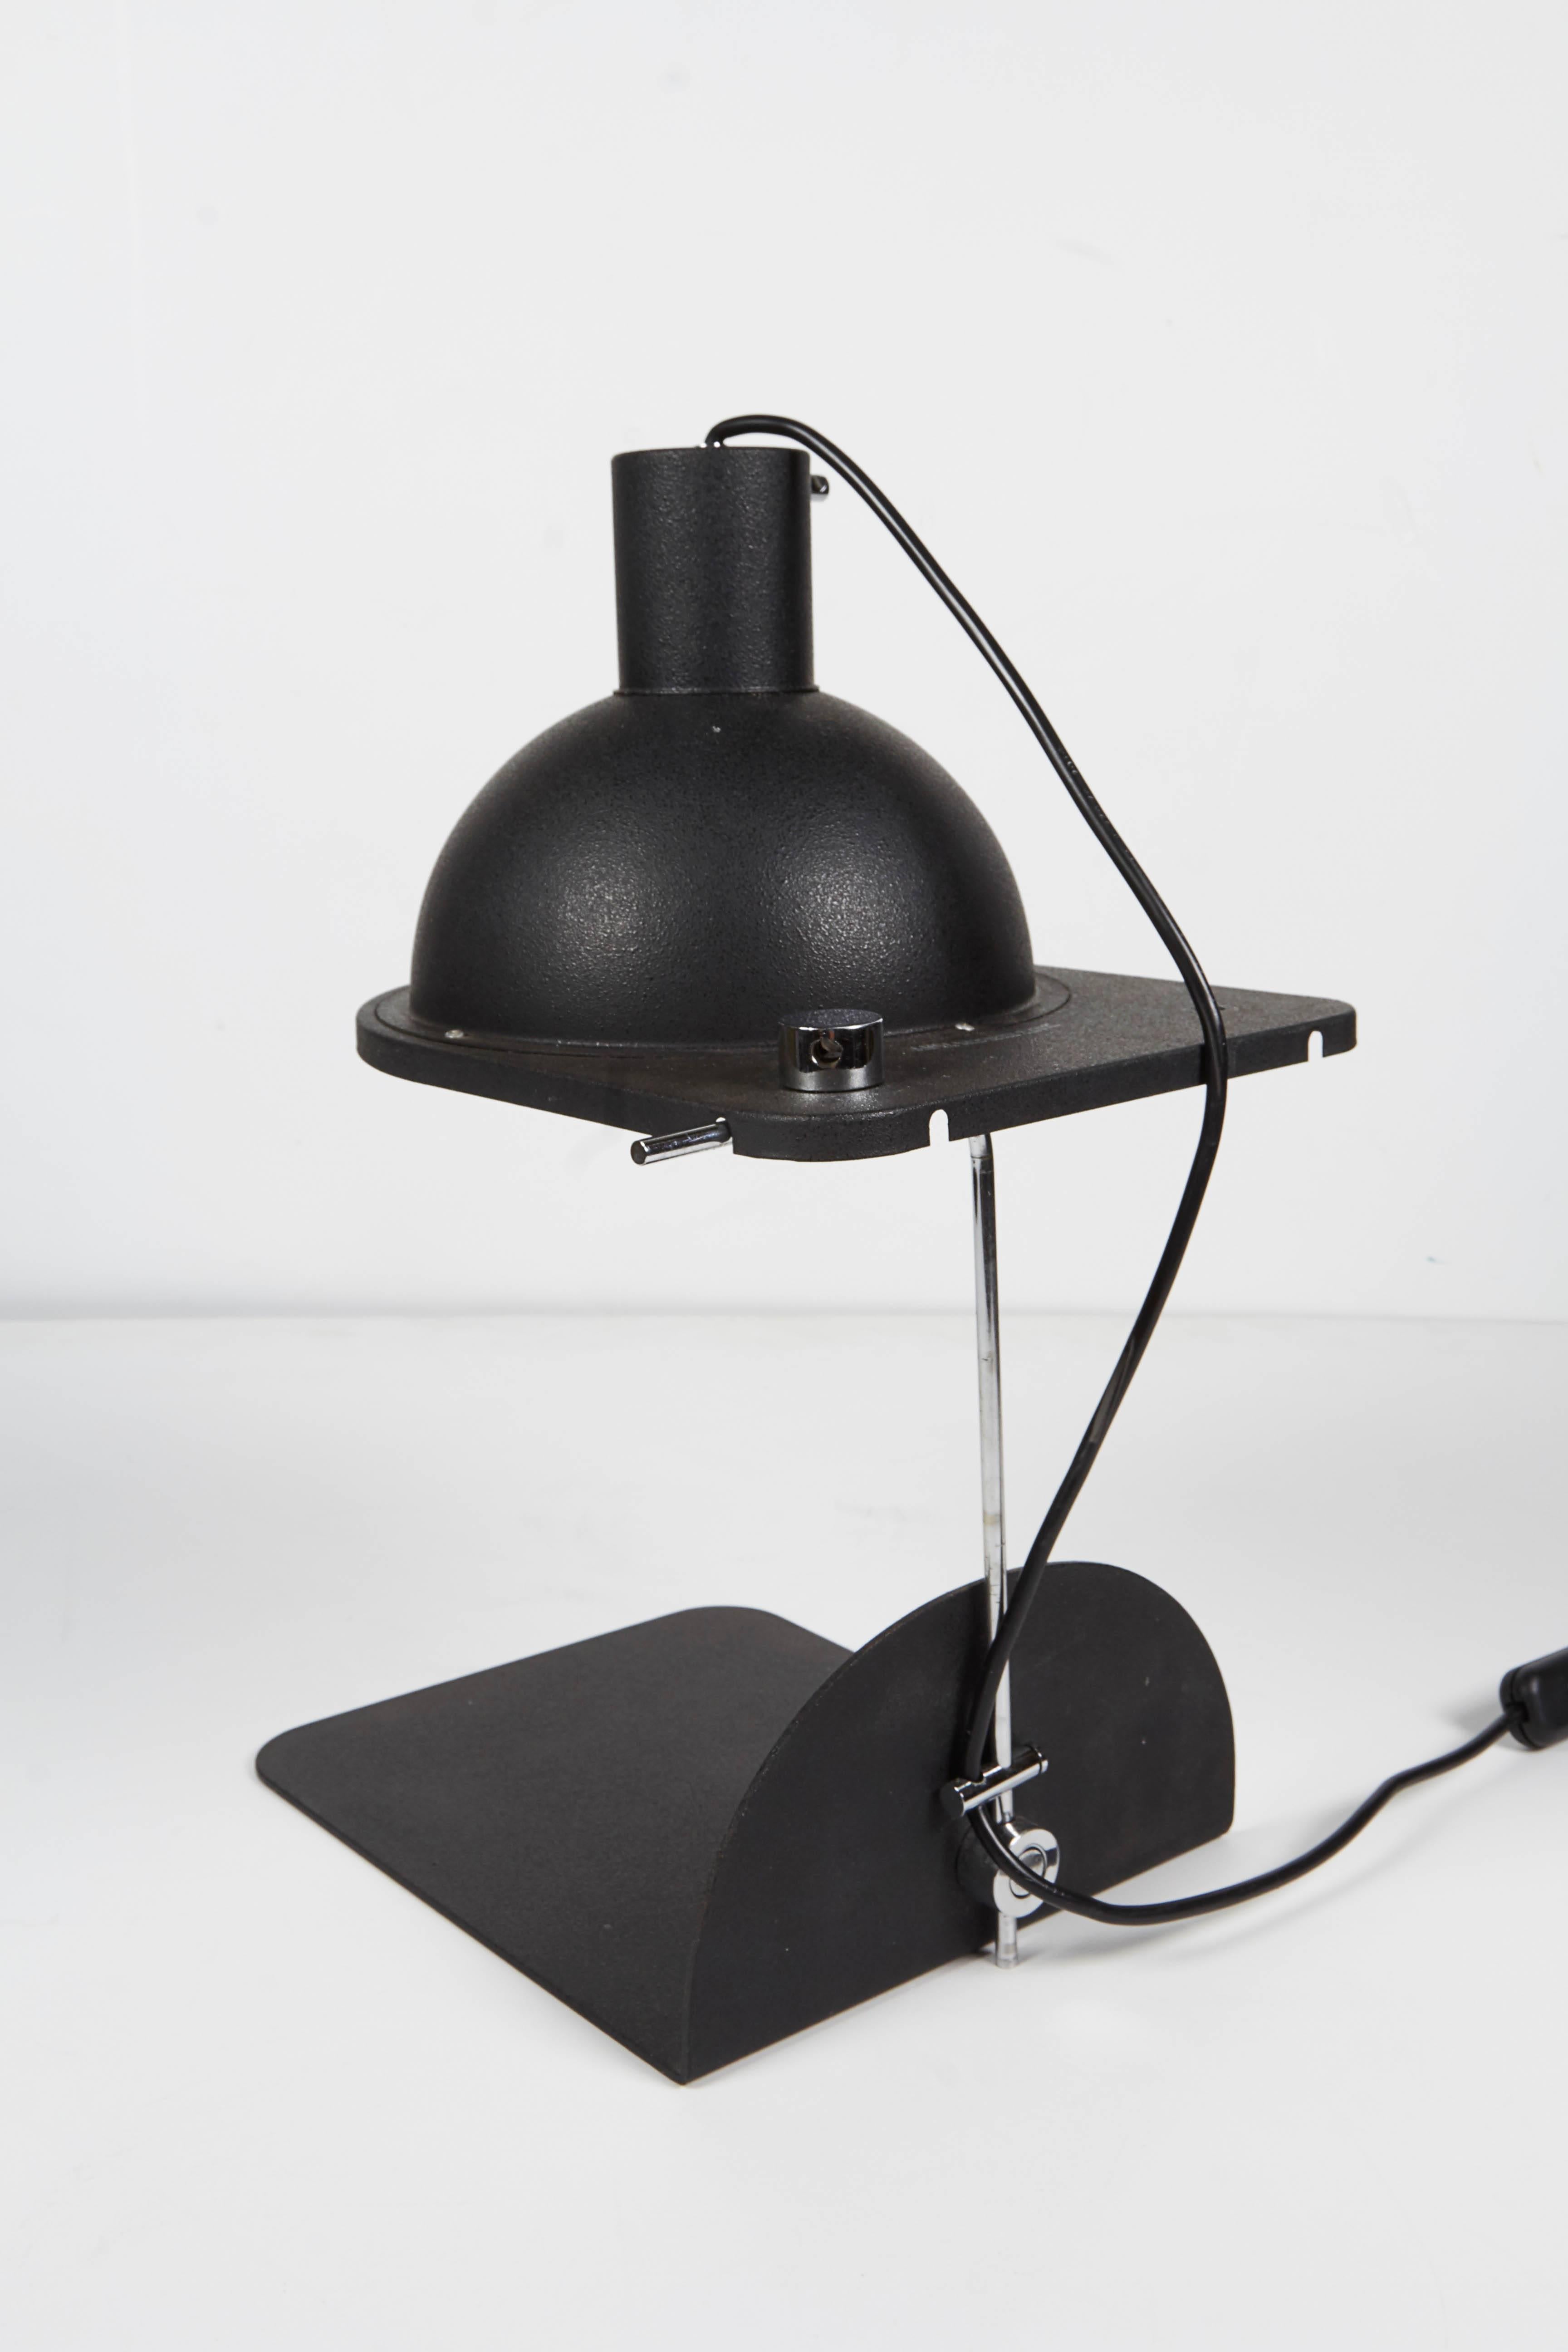 1970 Black Satin Italian Table Lamp by Luci Design Grignani For Sale 1